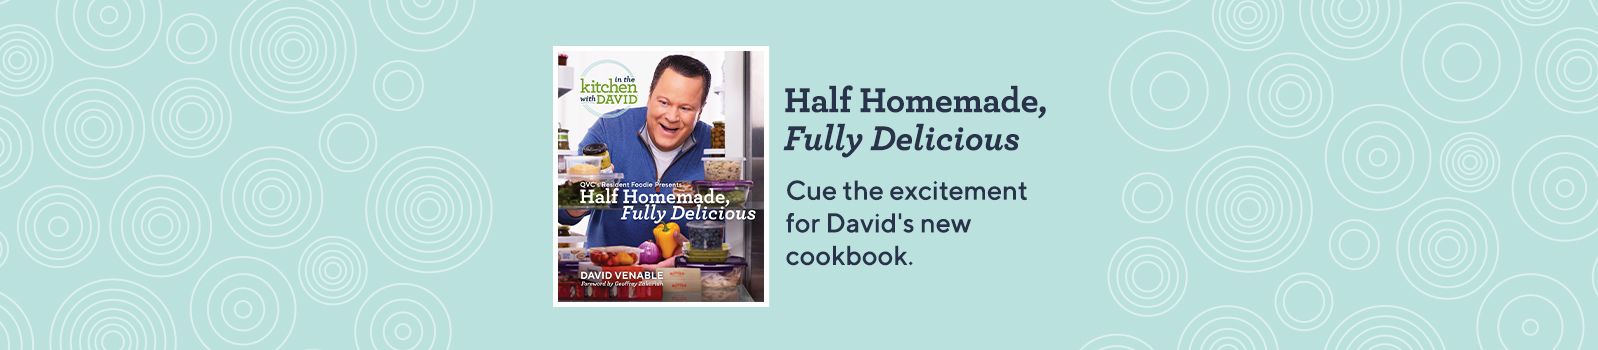 Half Homemade, Fully Delicious Cue the excitement for David's new cookbook.